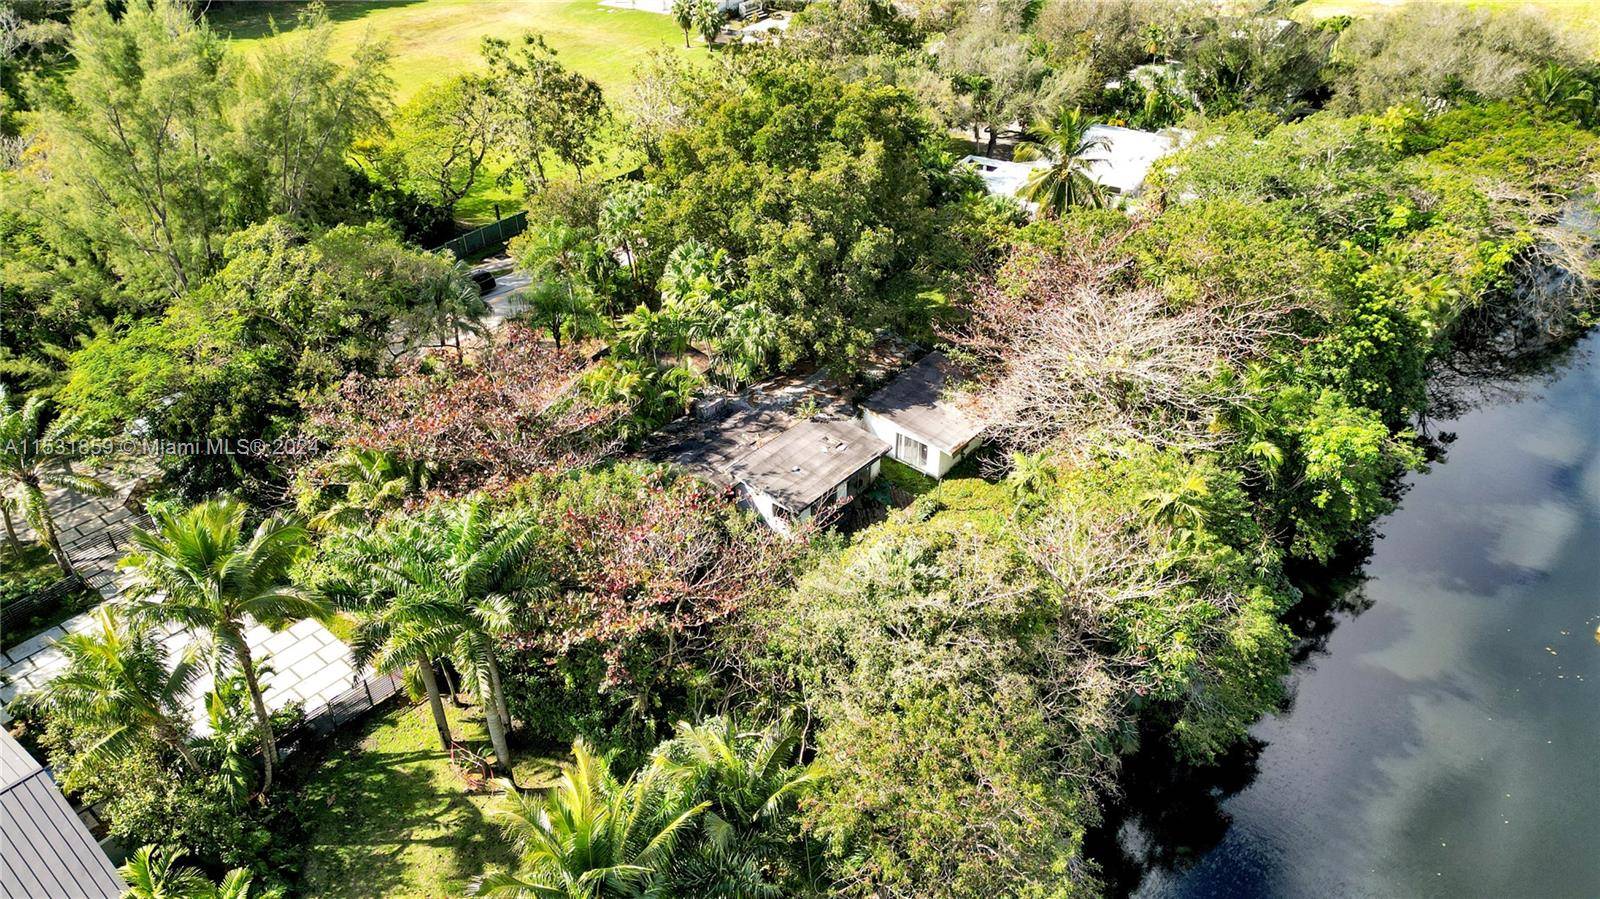 Experience the epitome of lush private living at this North Pinecrest estate on a builder's acre of 29, 000 sf overlooking Snapper Creek Canal.